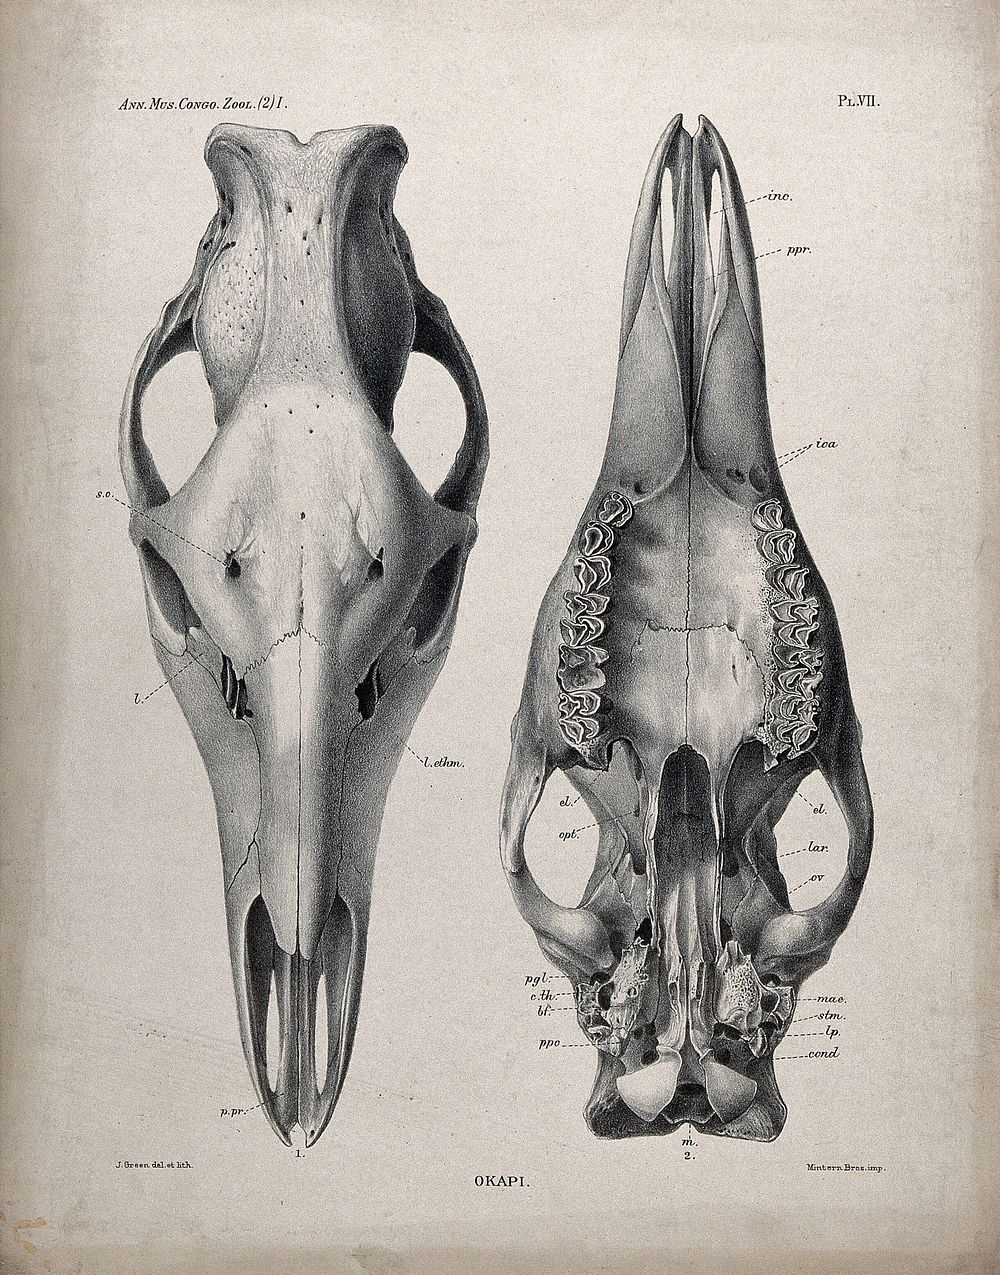 The skeletal head of an okapi seen from above and below. Lithograph by J. Green.